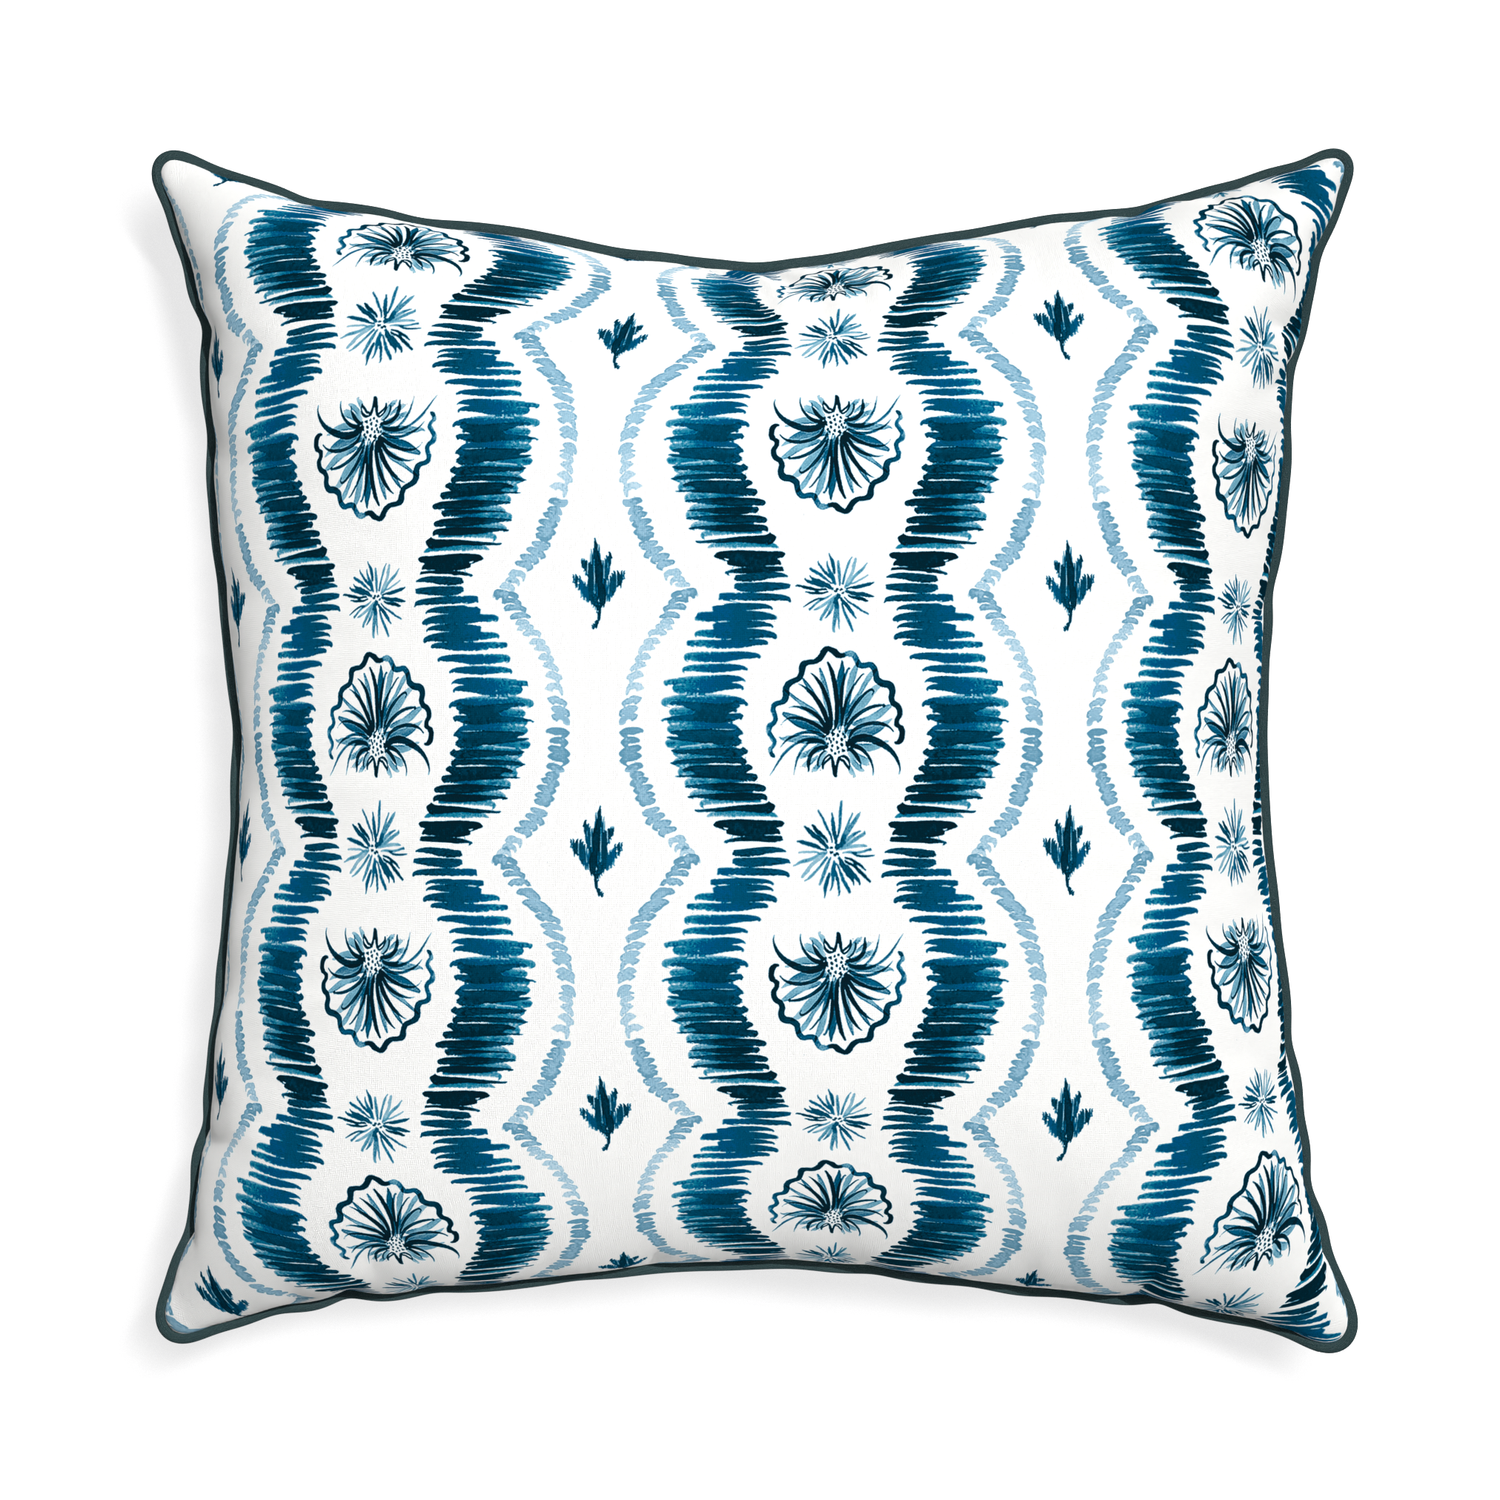 Euro-sham alice custom blue ikatpillow with p piping on white background